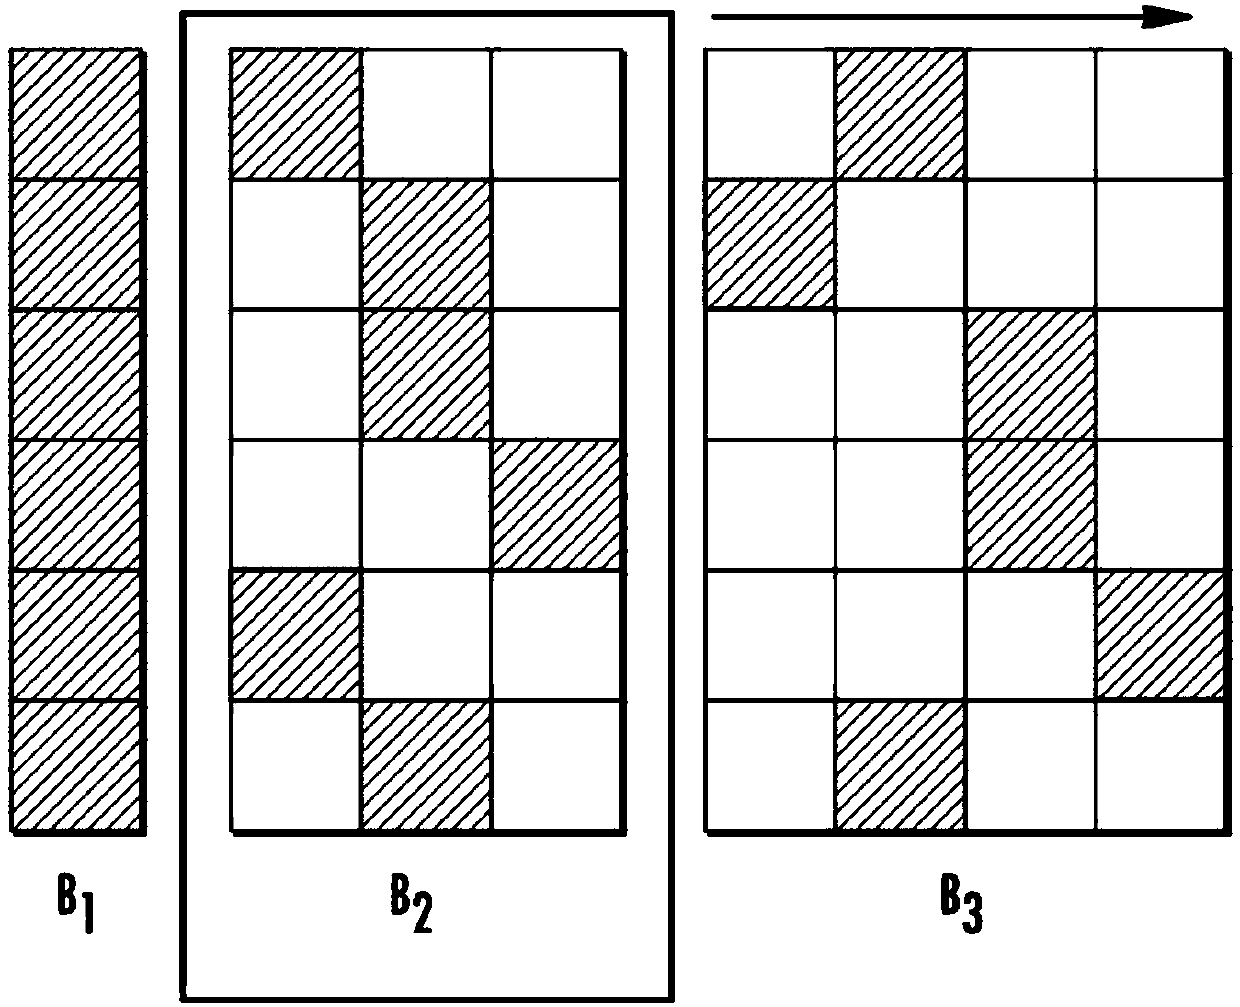 Systems and methods for robust large-scale machine learning